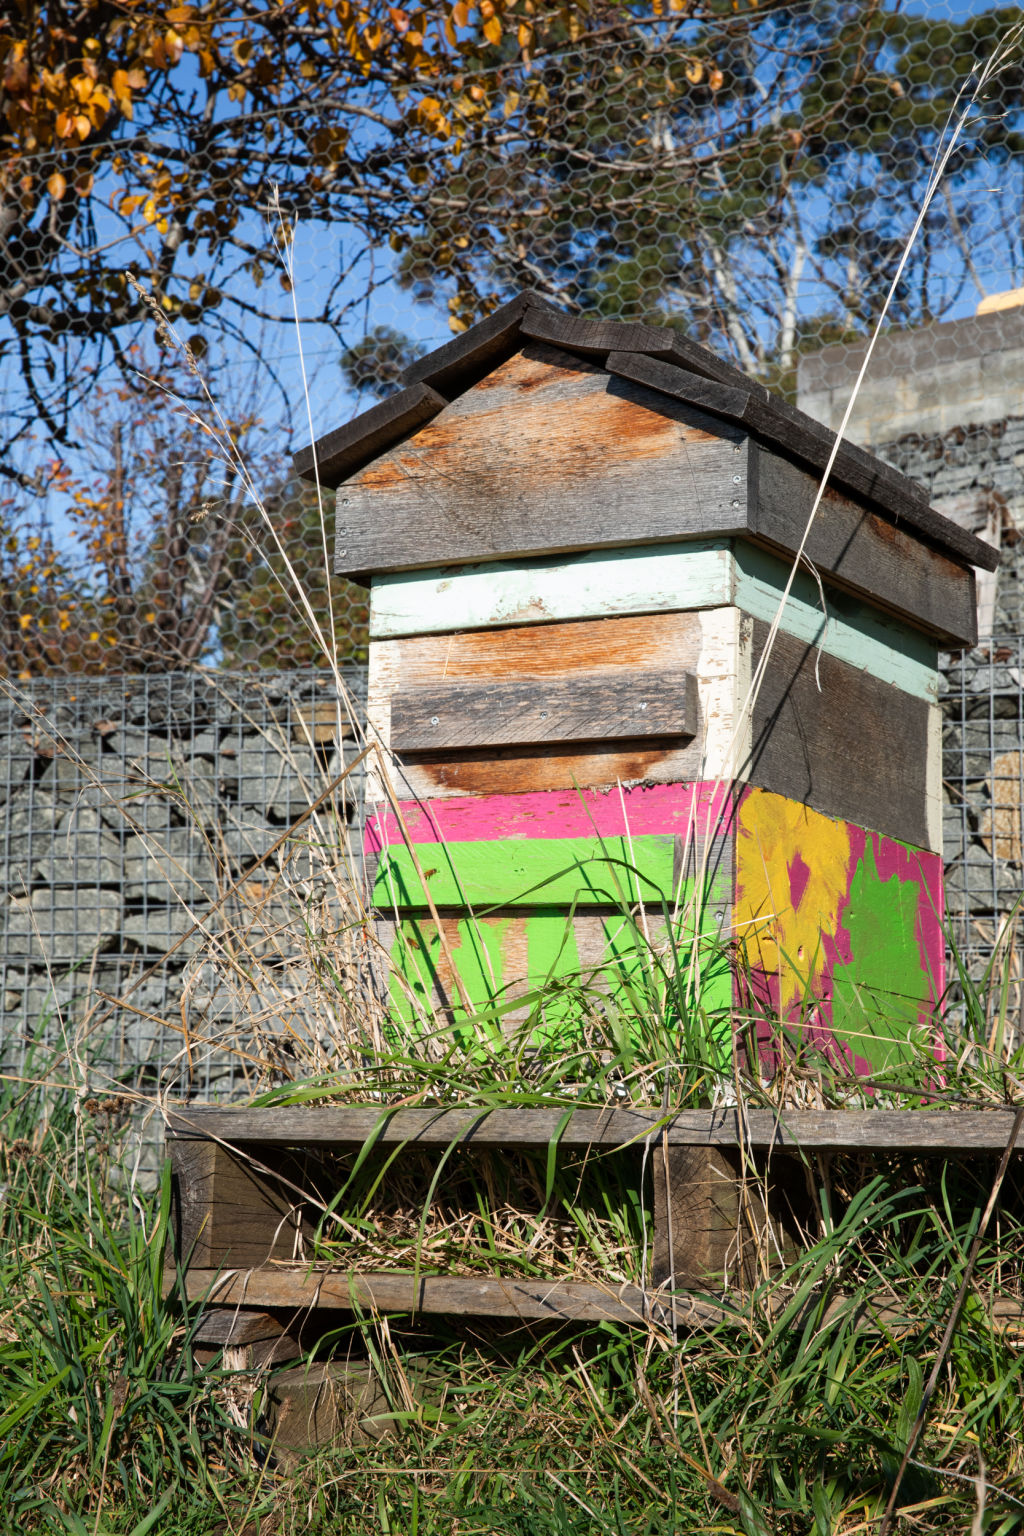 Even the bees get a bright hive to call home. Photo: NATASHA MULHALL